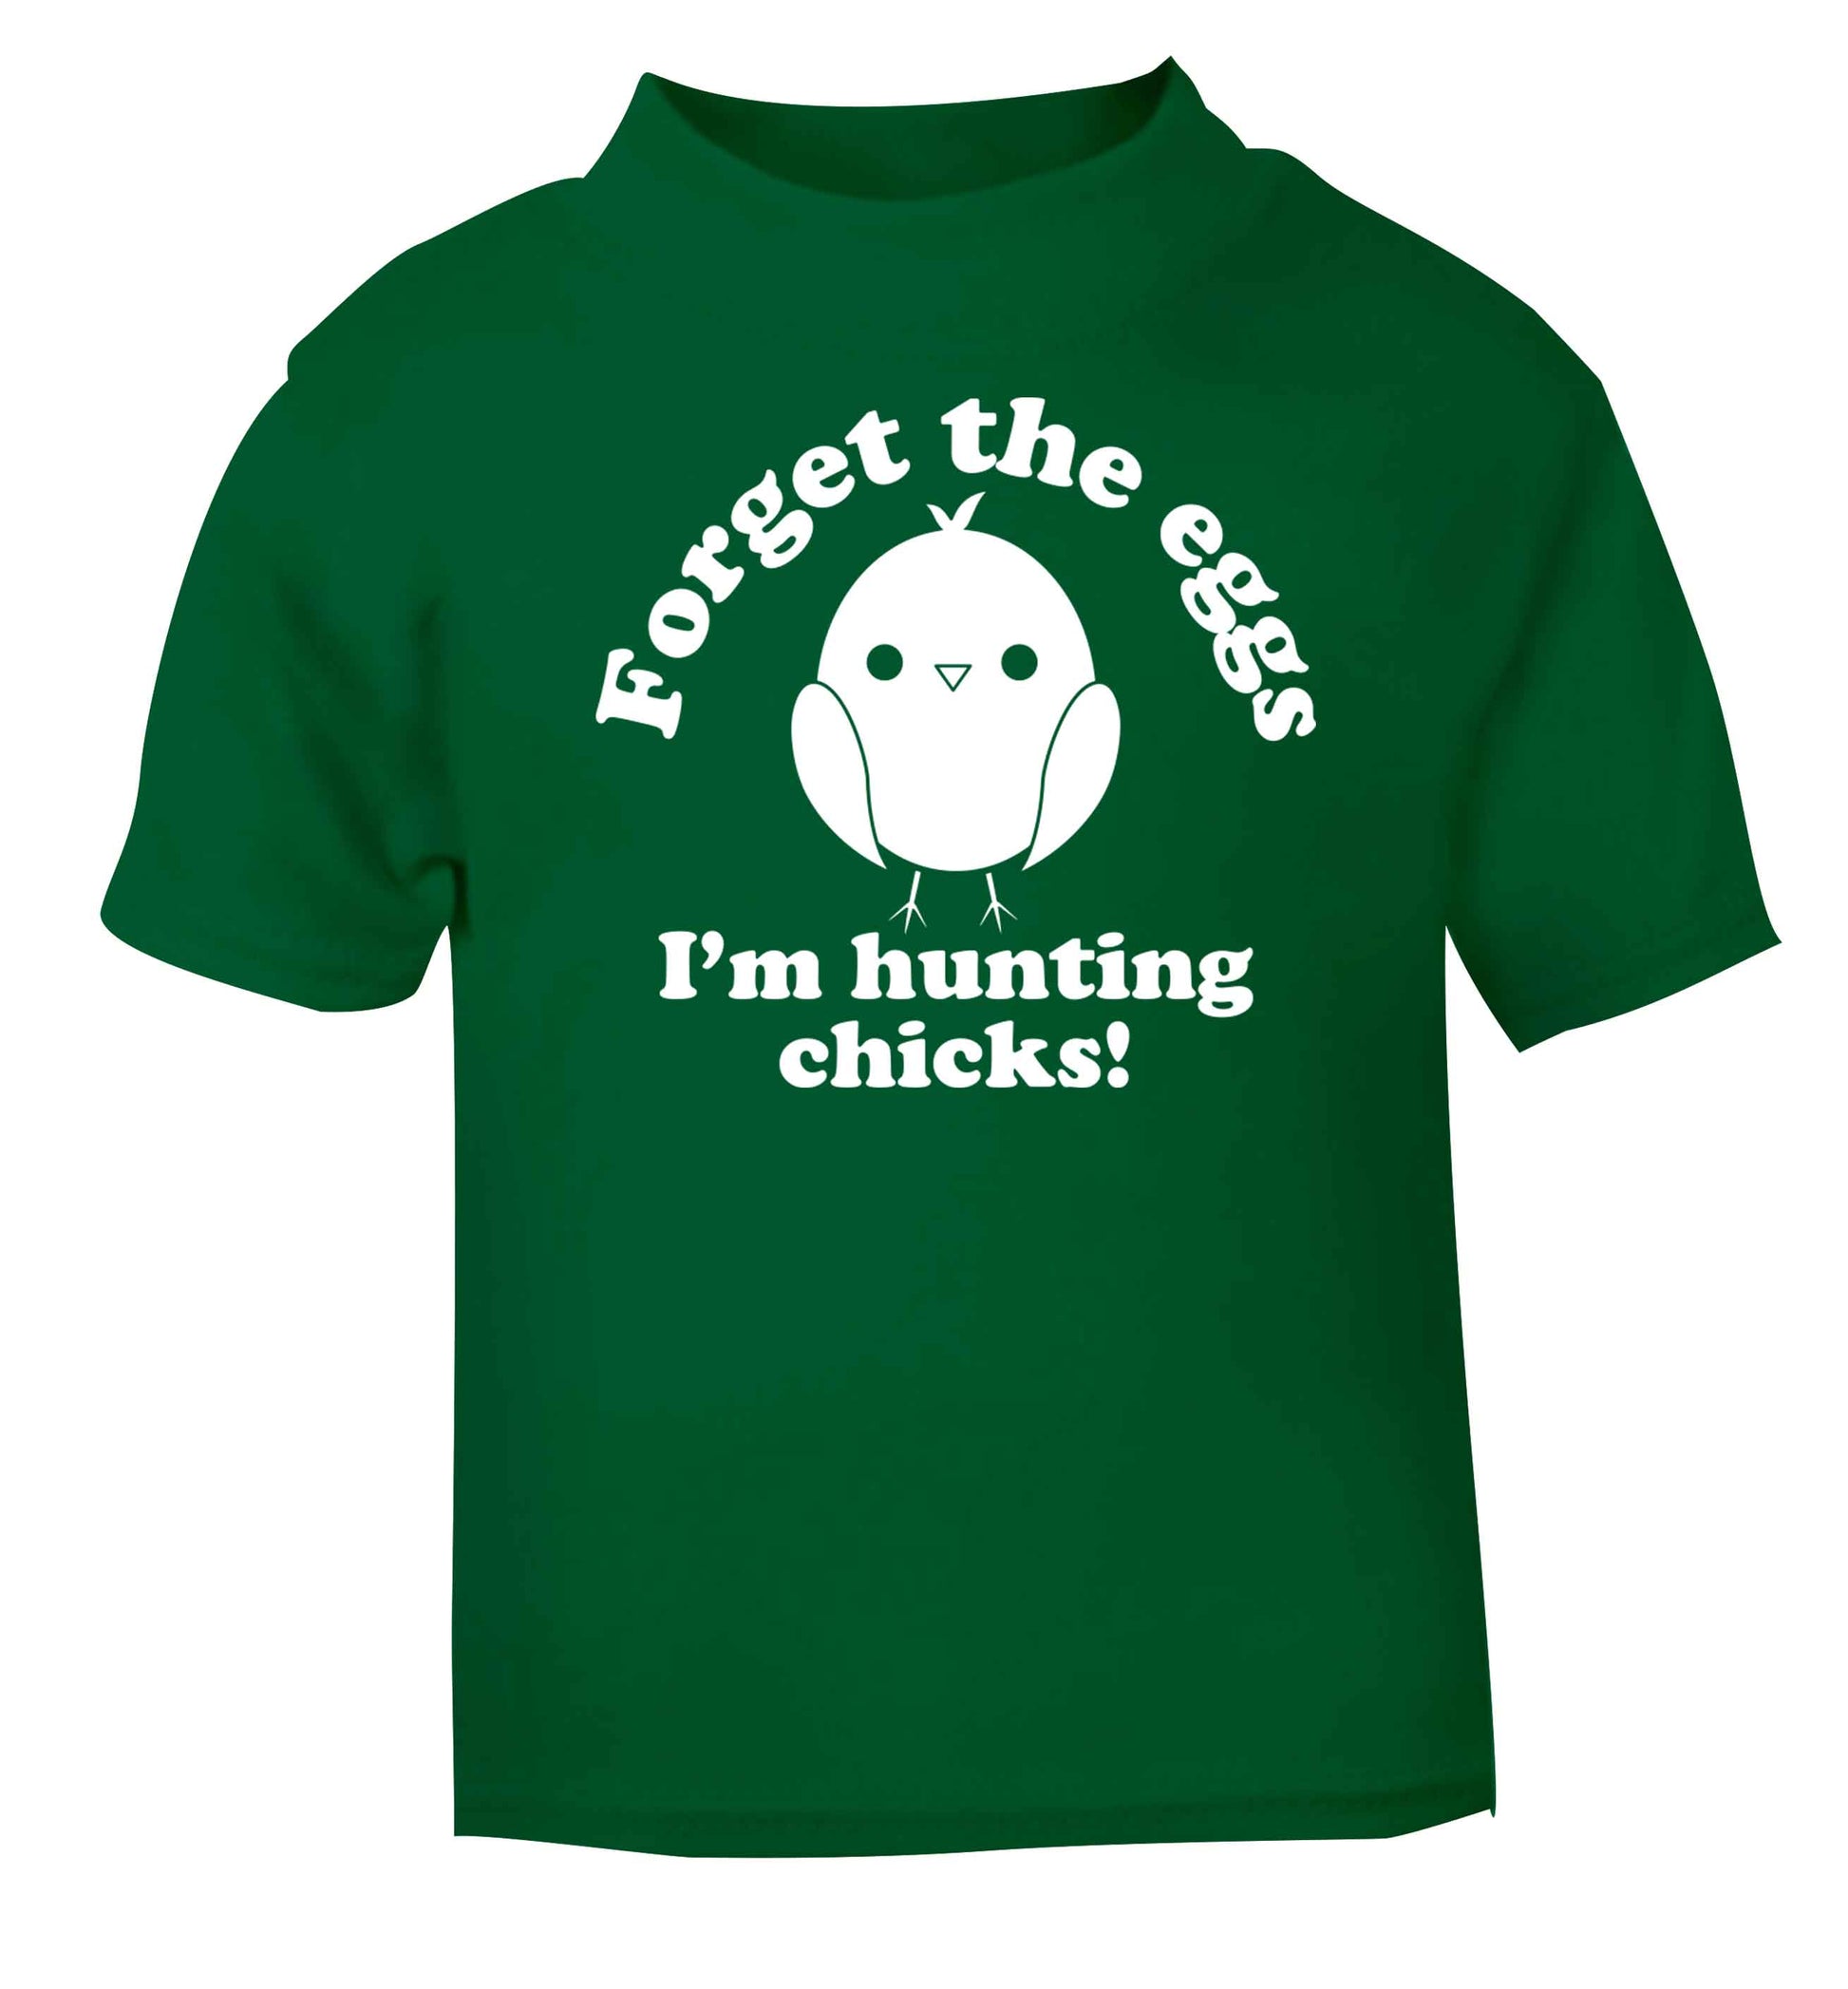 Forget the eggs I'm hunting chicks! green baby toddler Tshirt 2 Years